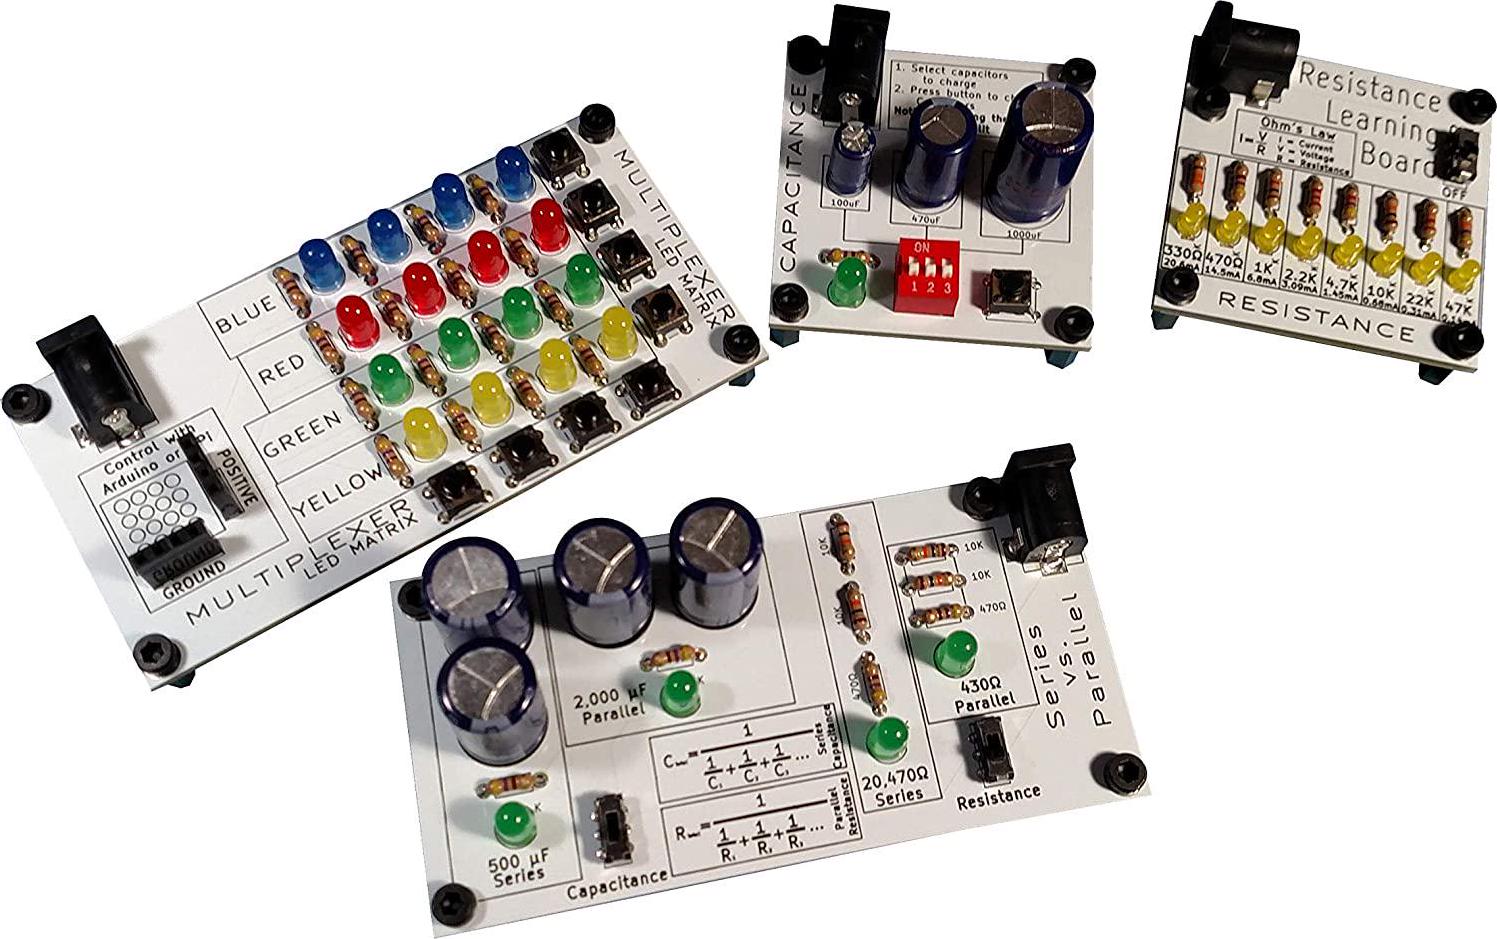 eLearnTronics, eLearnTronics Full Set of 4 Electronics Learning Boards | Practice Soldering and Learn Electronics | Multiplexer, Resistance, Capacitance, and Series vs. Parallel